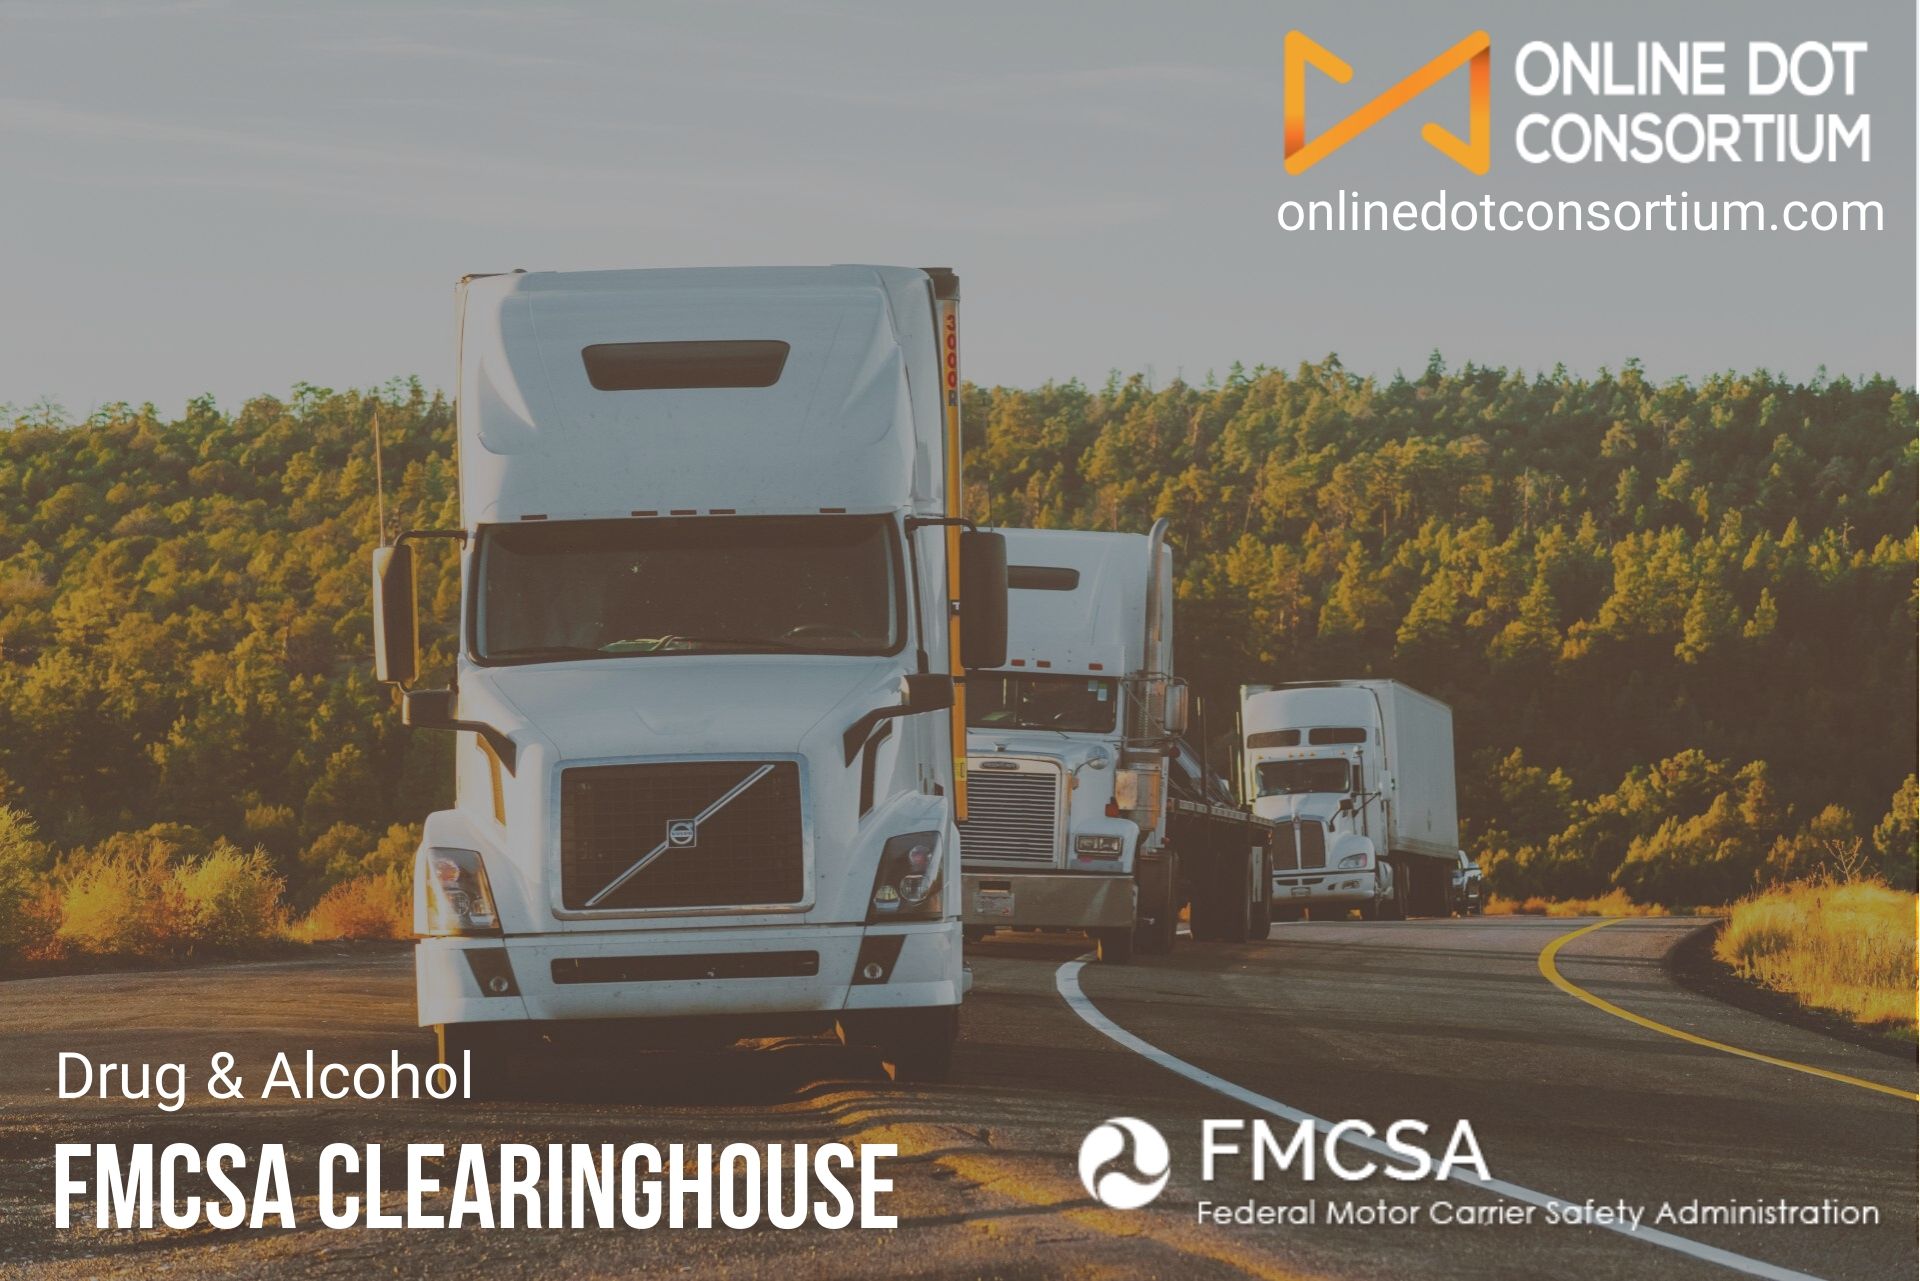 FMCSA Clearinghouse Services